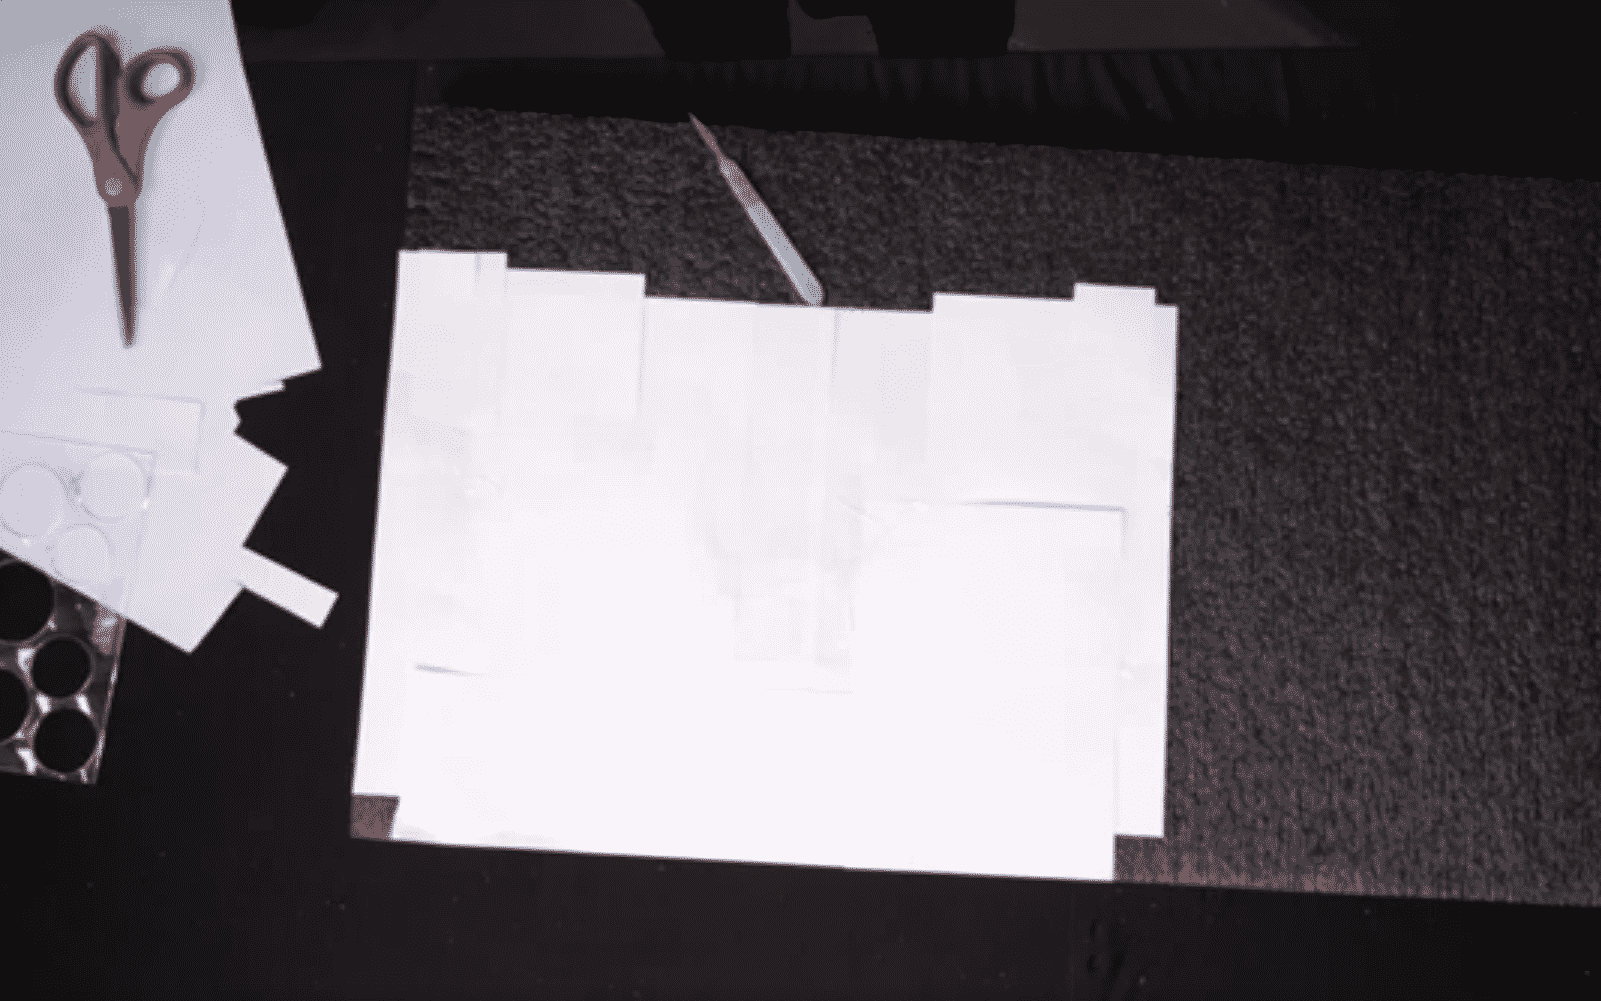 The paper template is then positioned onto your choice of foam, ready for the profile to be cut out